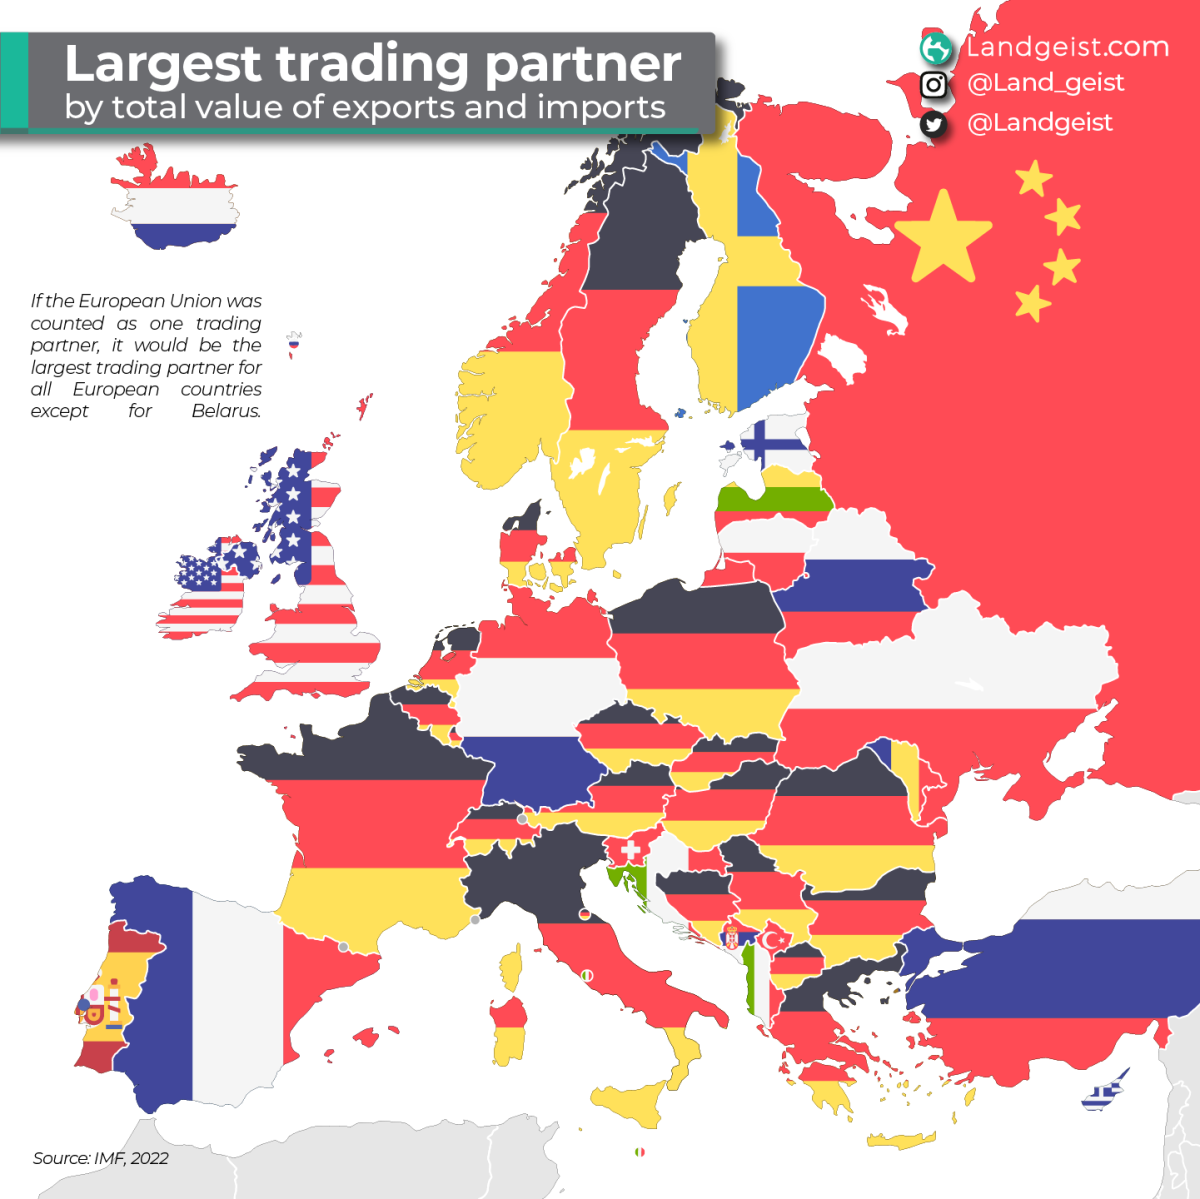 The Largest Trading Partner of European Countries